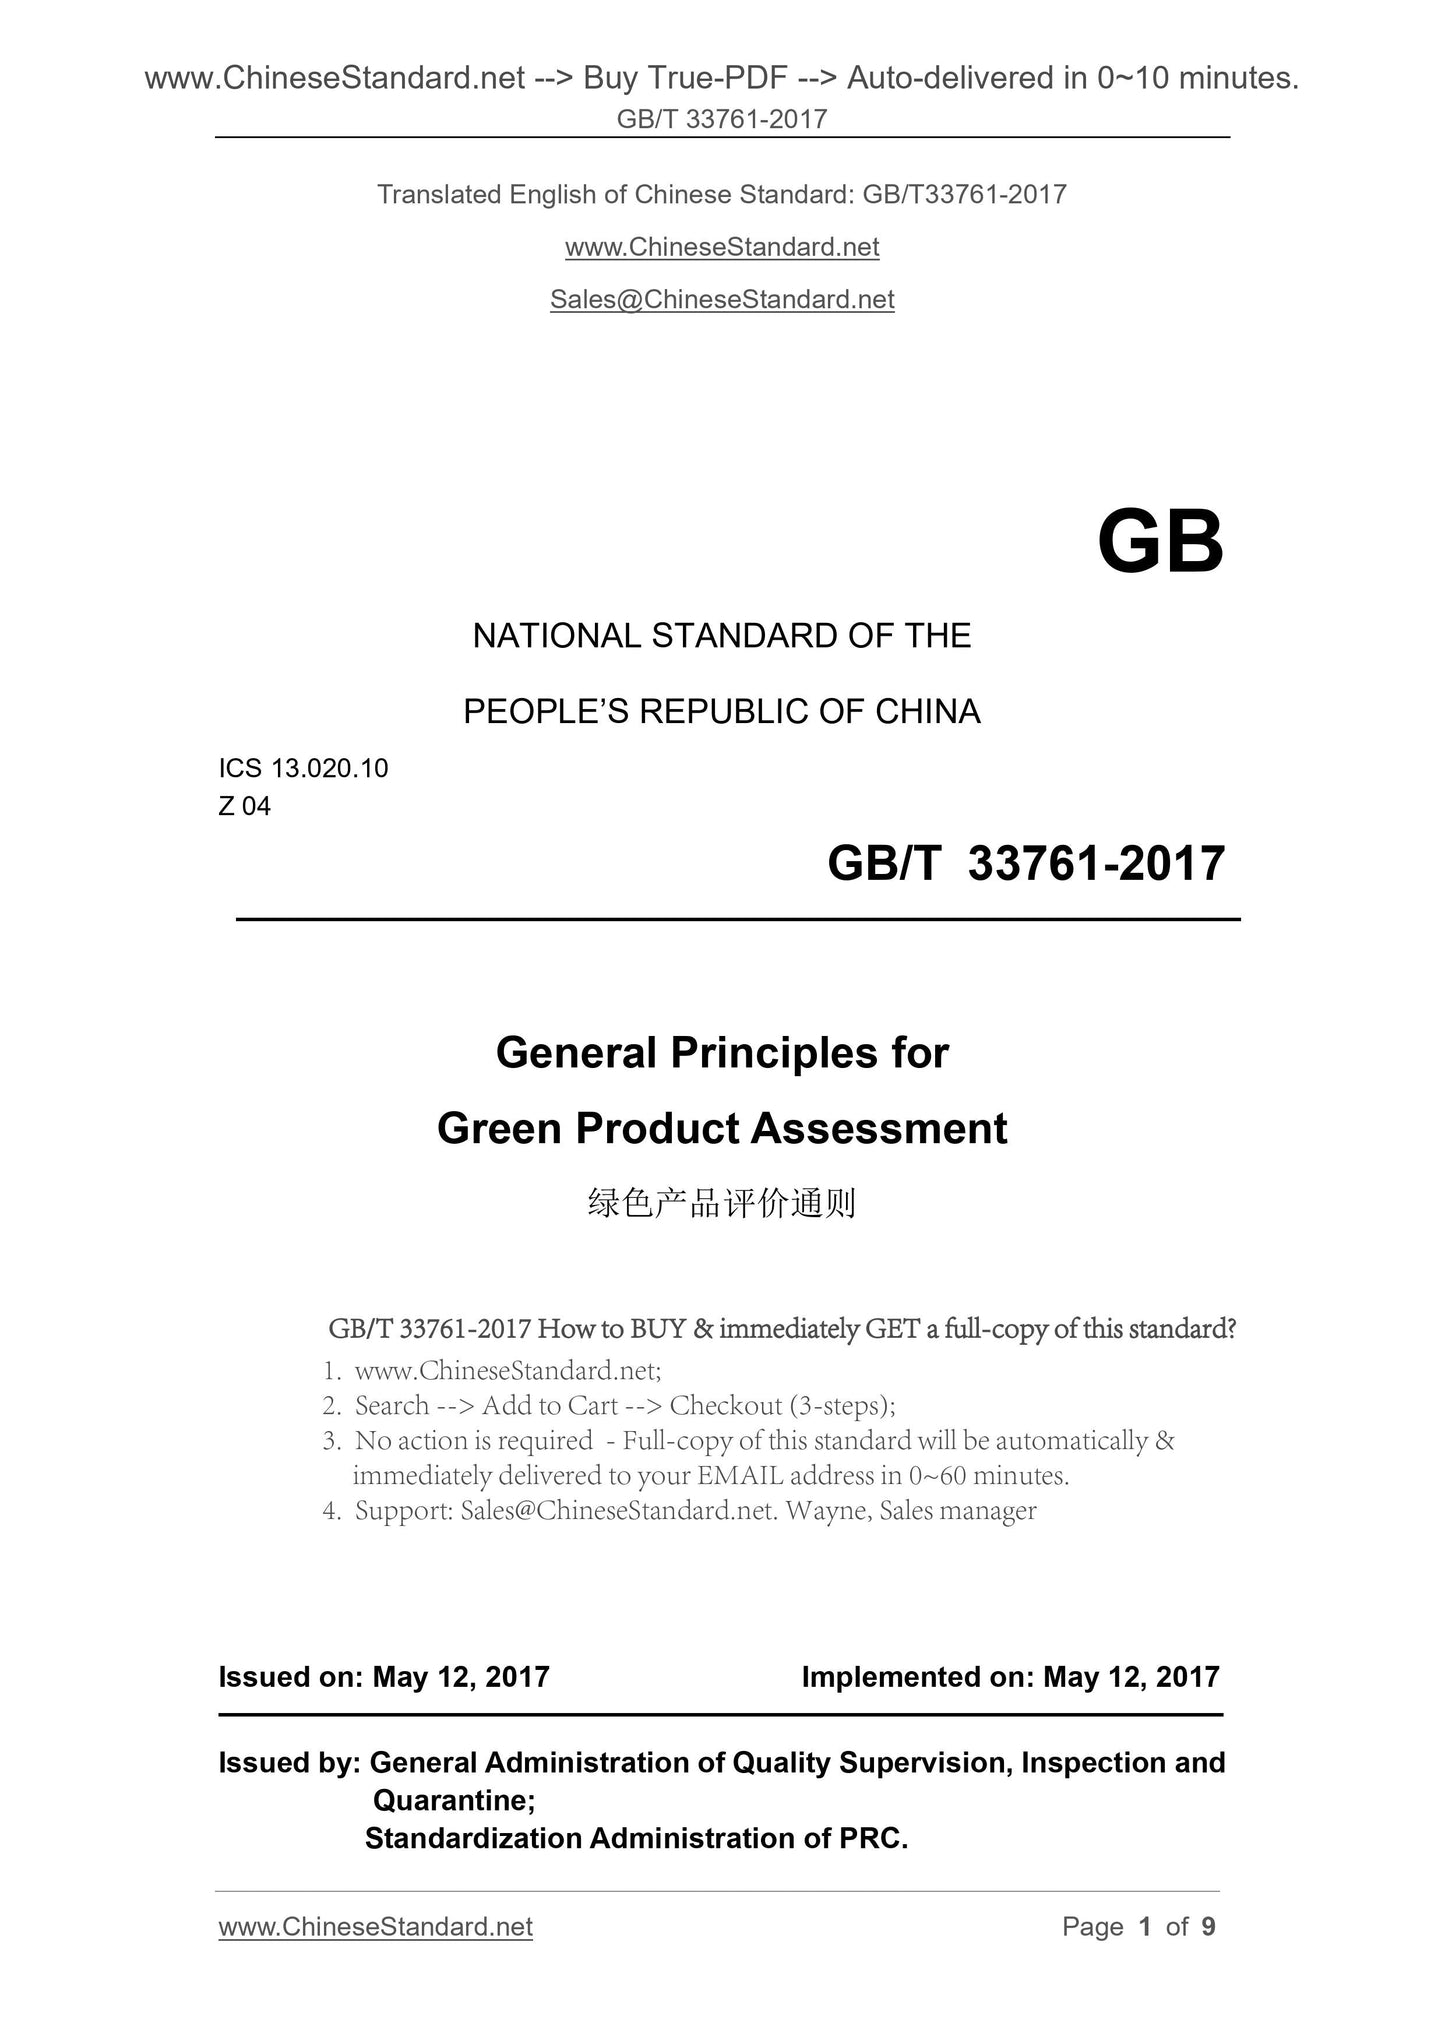 GB/T 33761-2017 Page 1